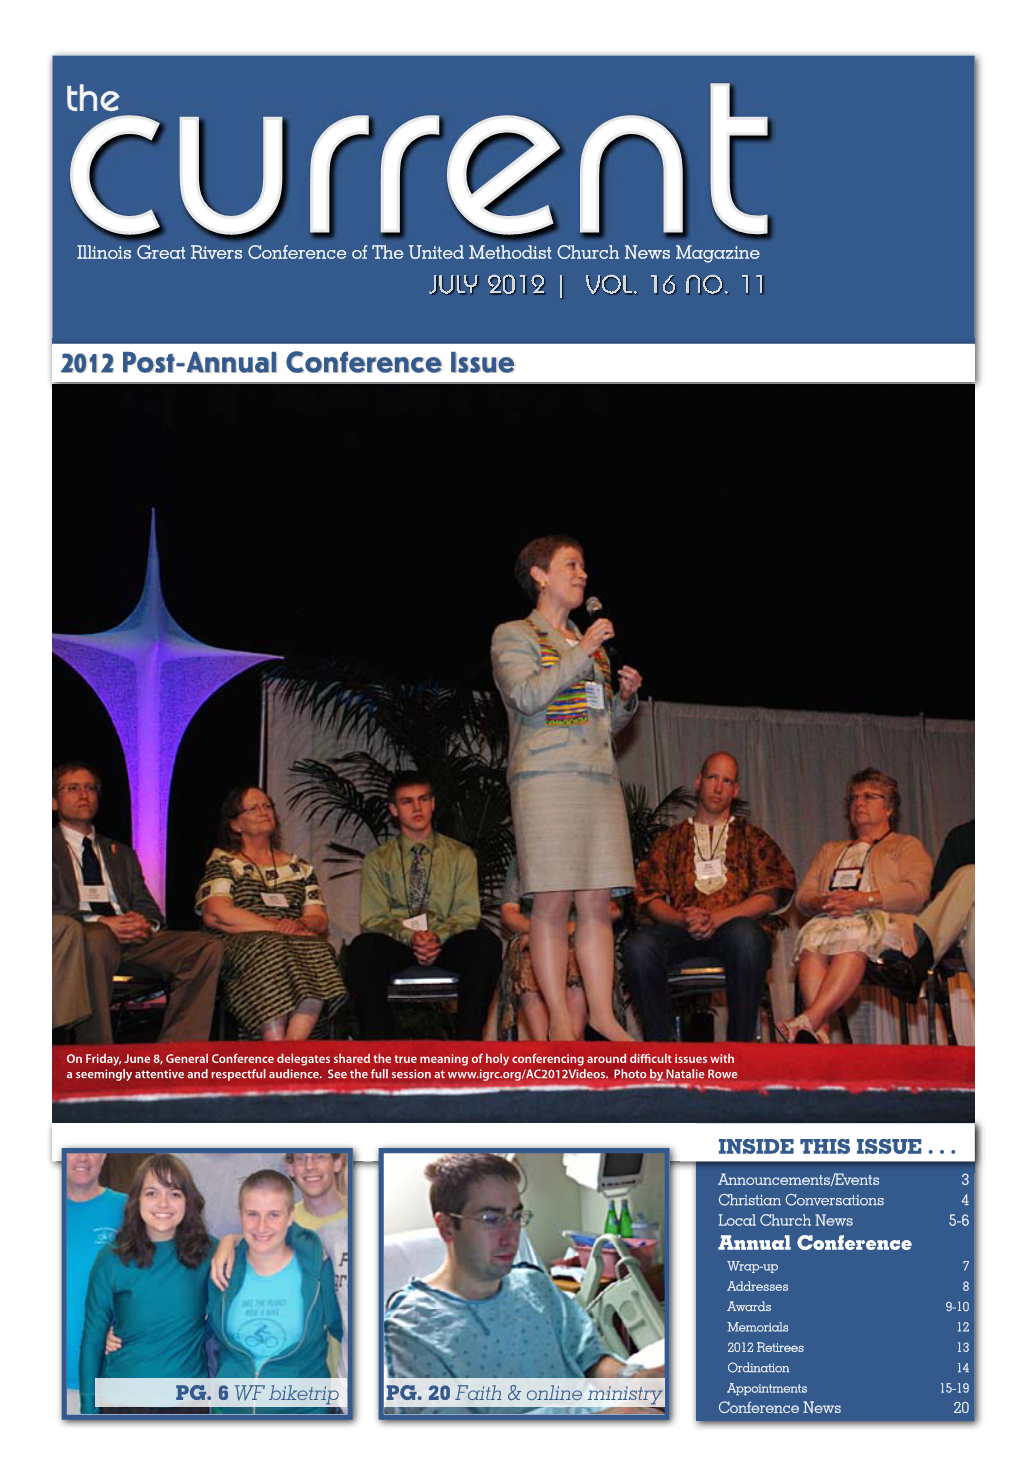 2012 Post-Annual Conference Issue